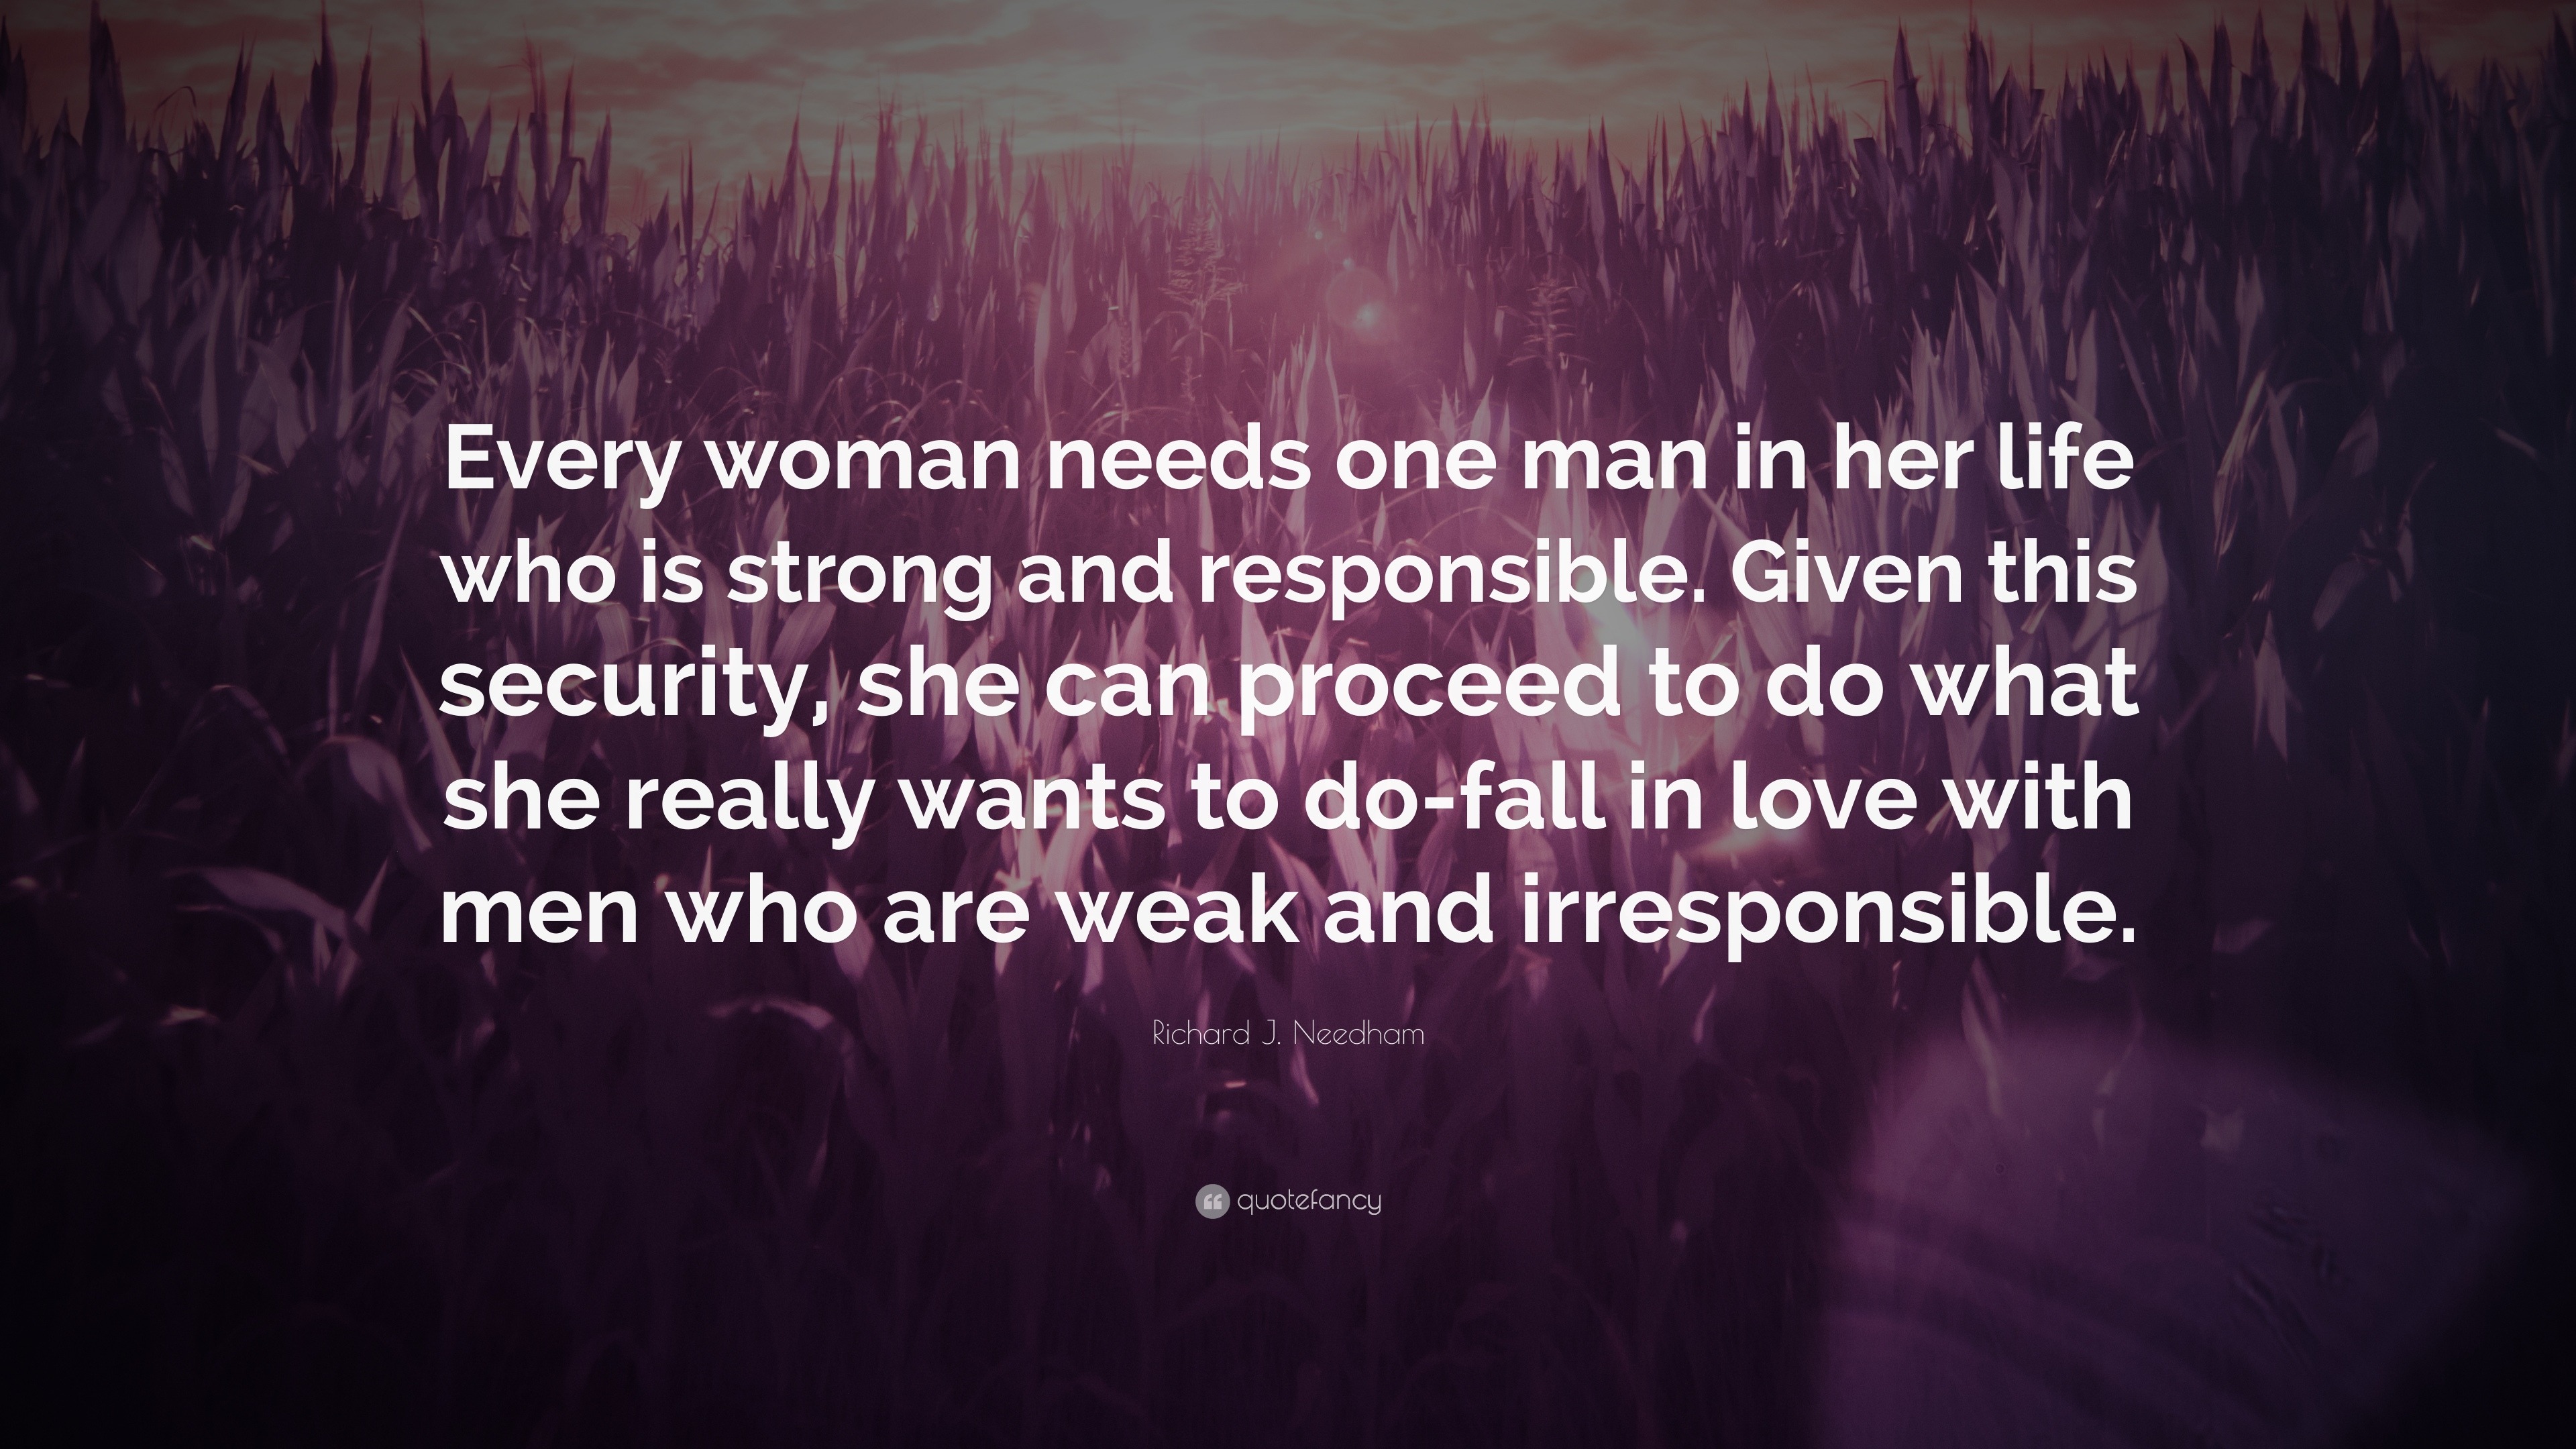 Richard J. Needham Quote: “Every woman needs one man in her life who is  strong and responsible. Given this security, she can proceed to do what  she”